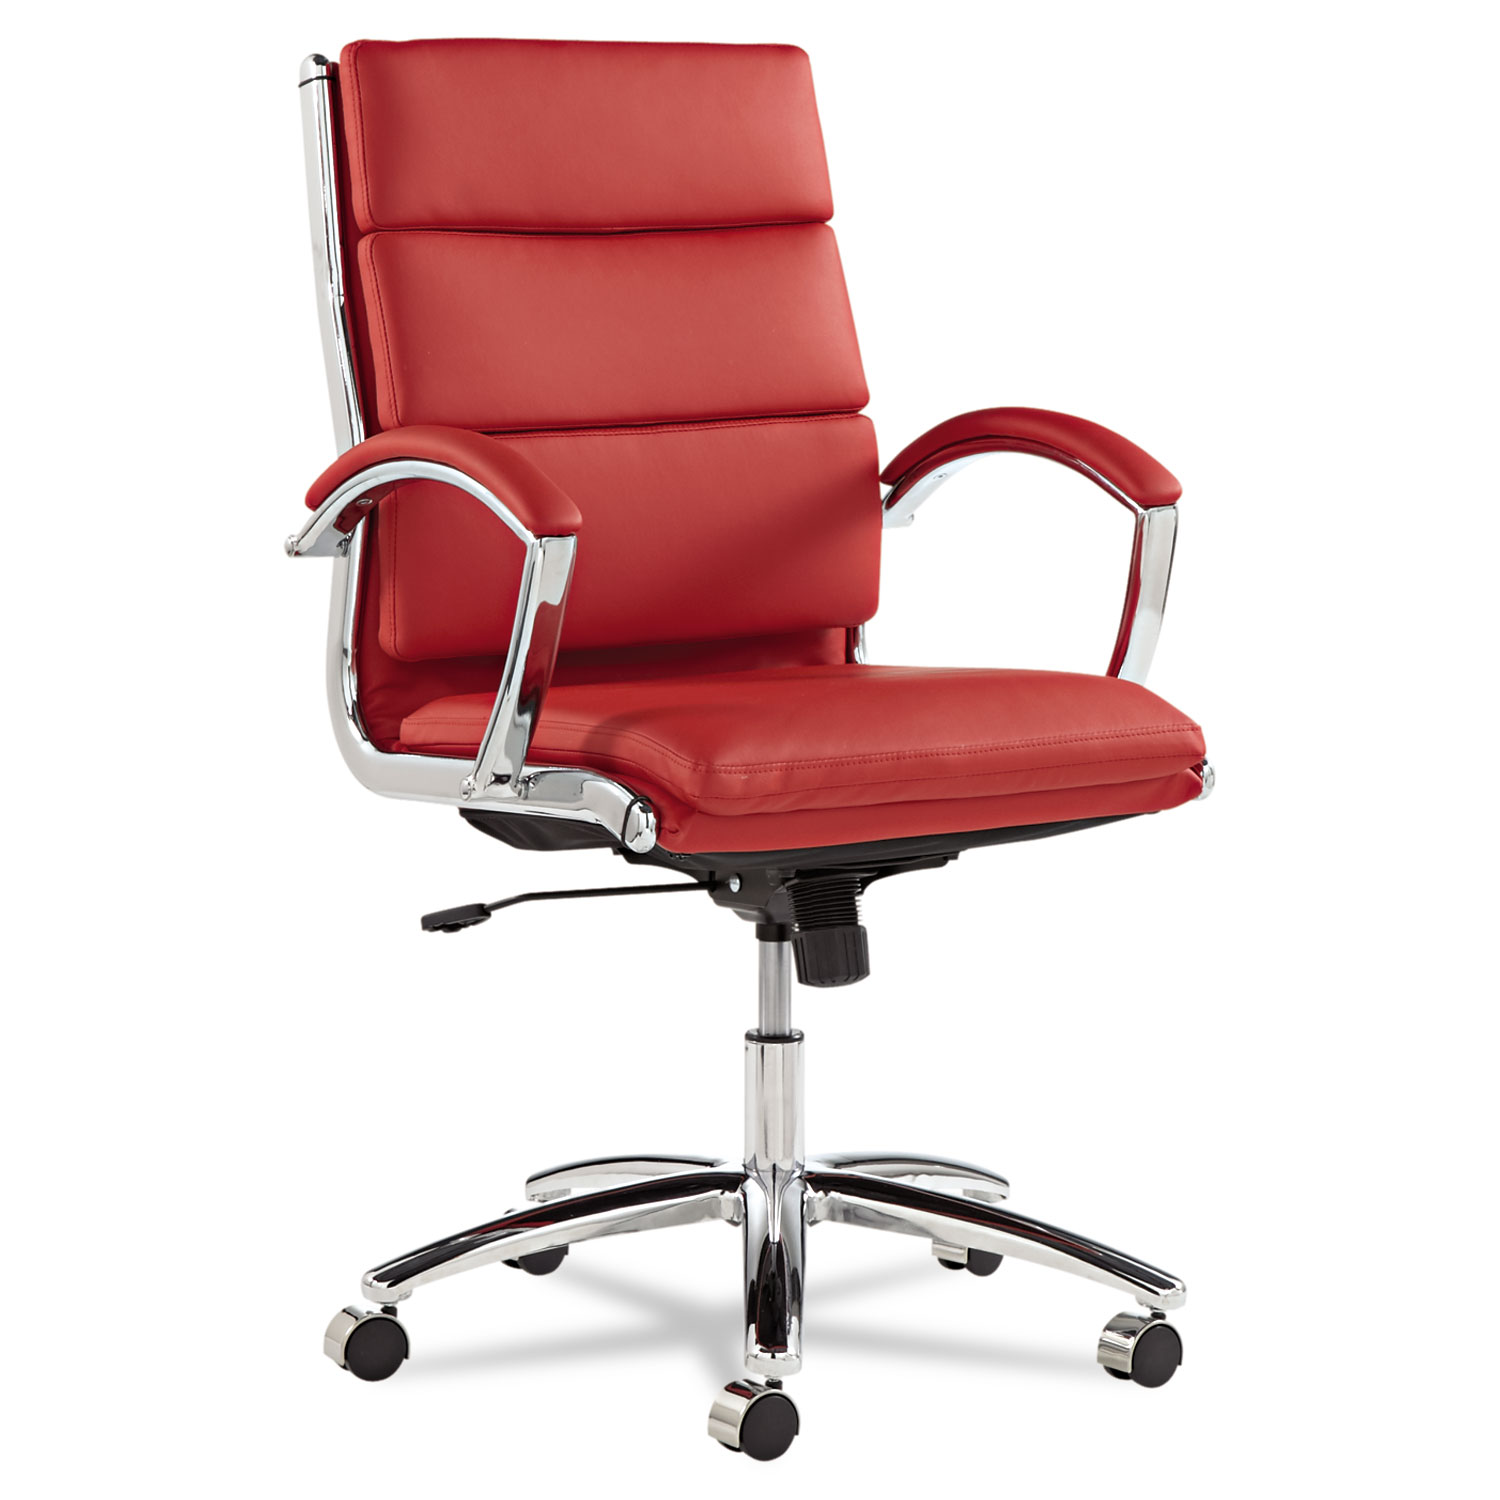  Alera ALENR4239 Alera Neratoli Mid-Back Slim Profile Chair, Supports up to 275 lbs., Red Seat/Red Back, Chrome Base (ALENR4239) 